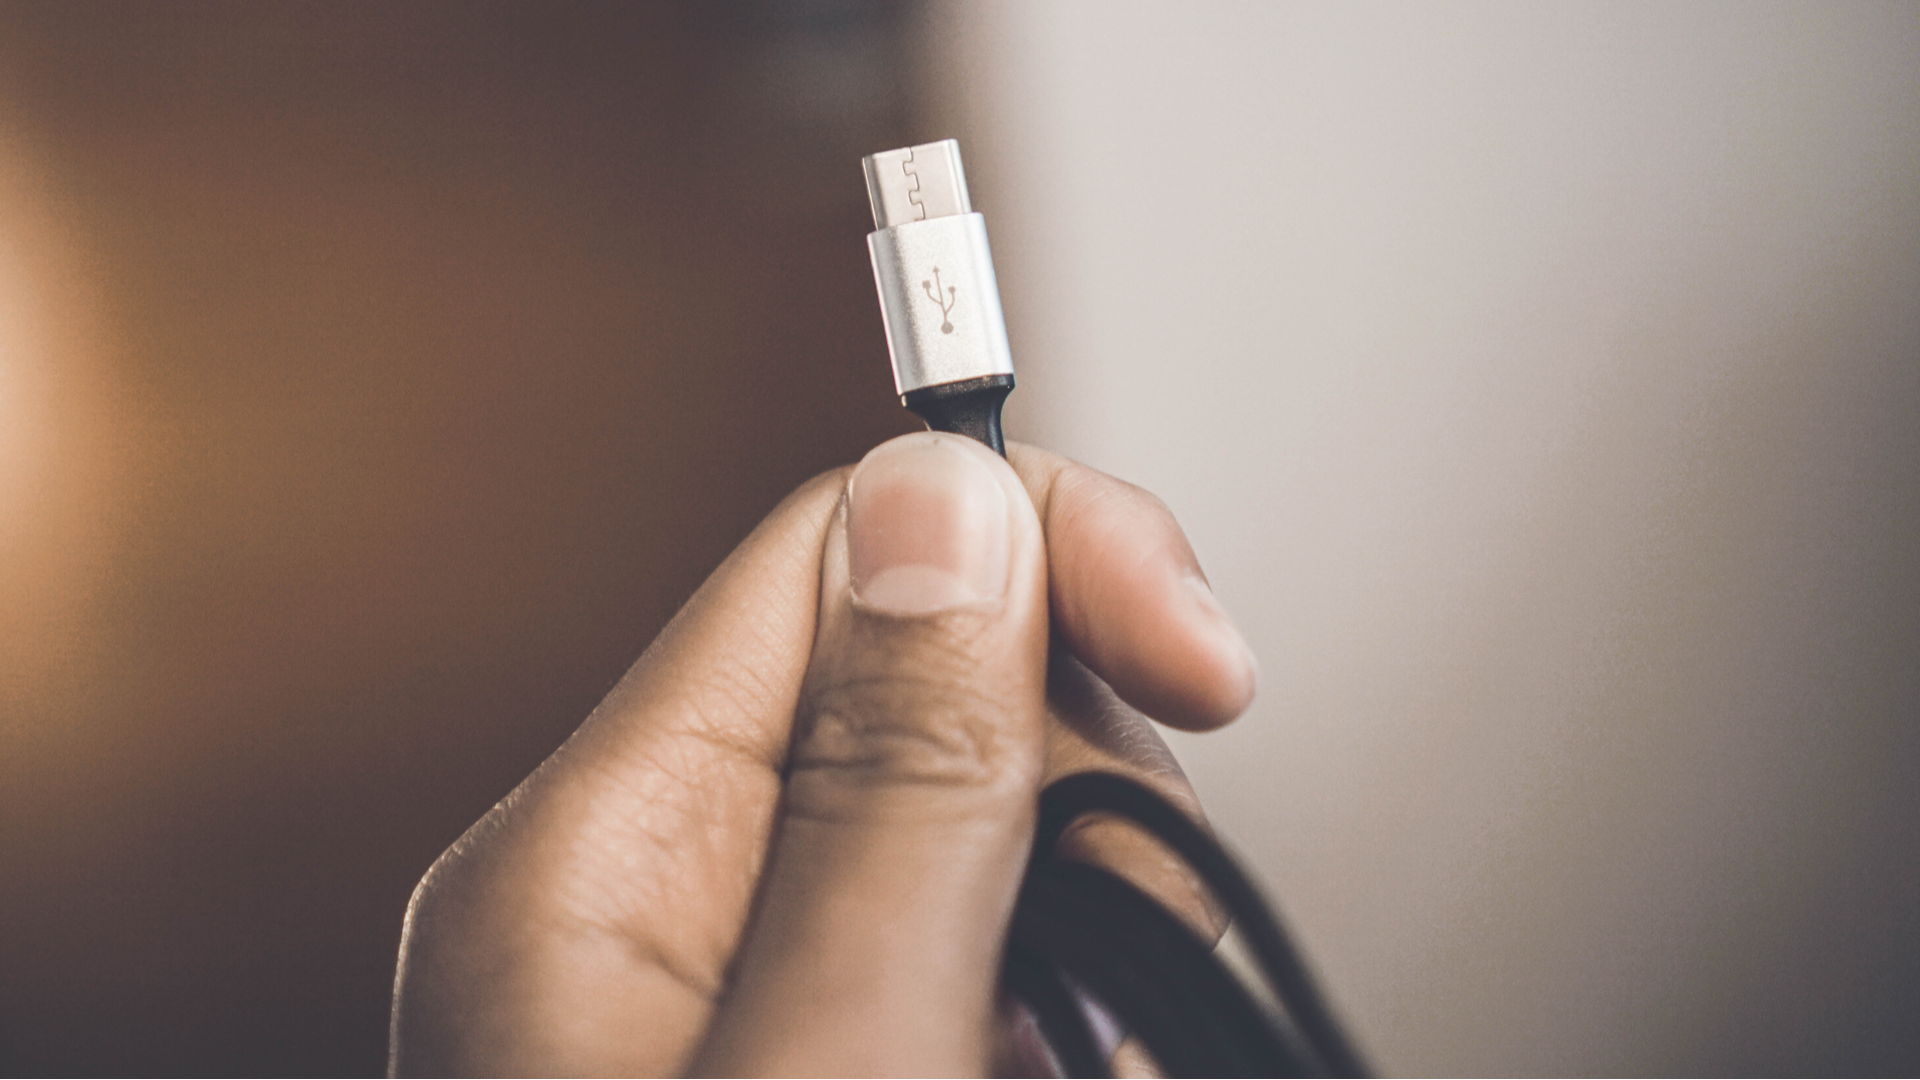 USB Explained: All the Different Types (and What They're Used for)